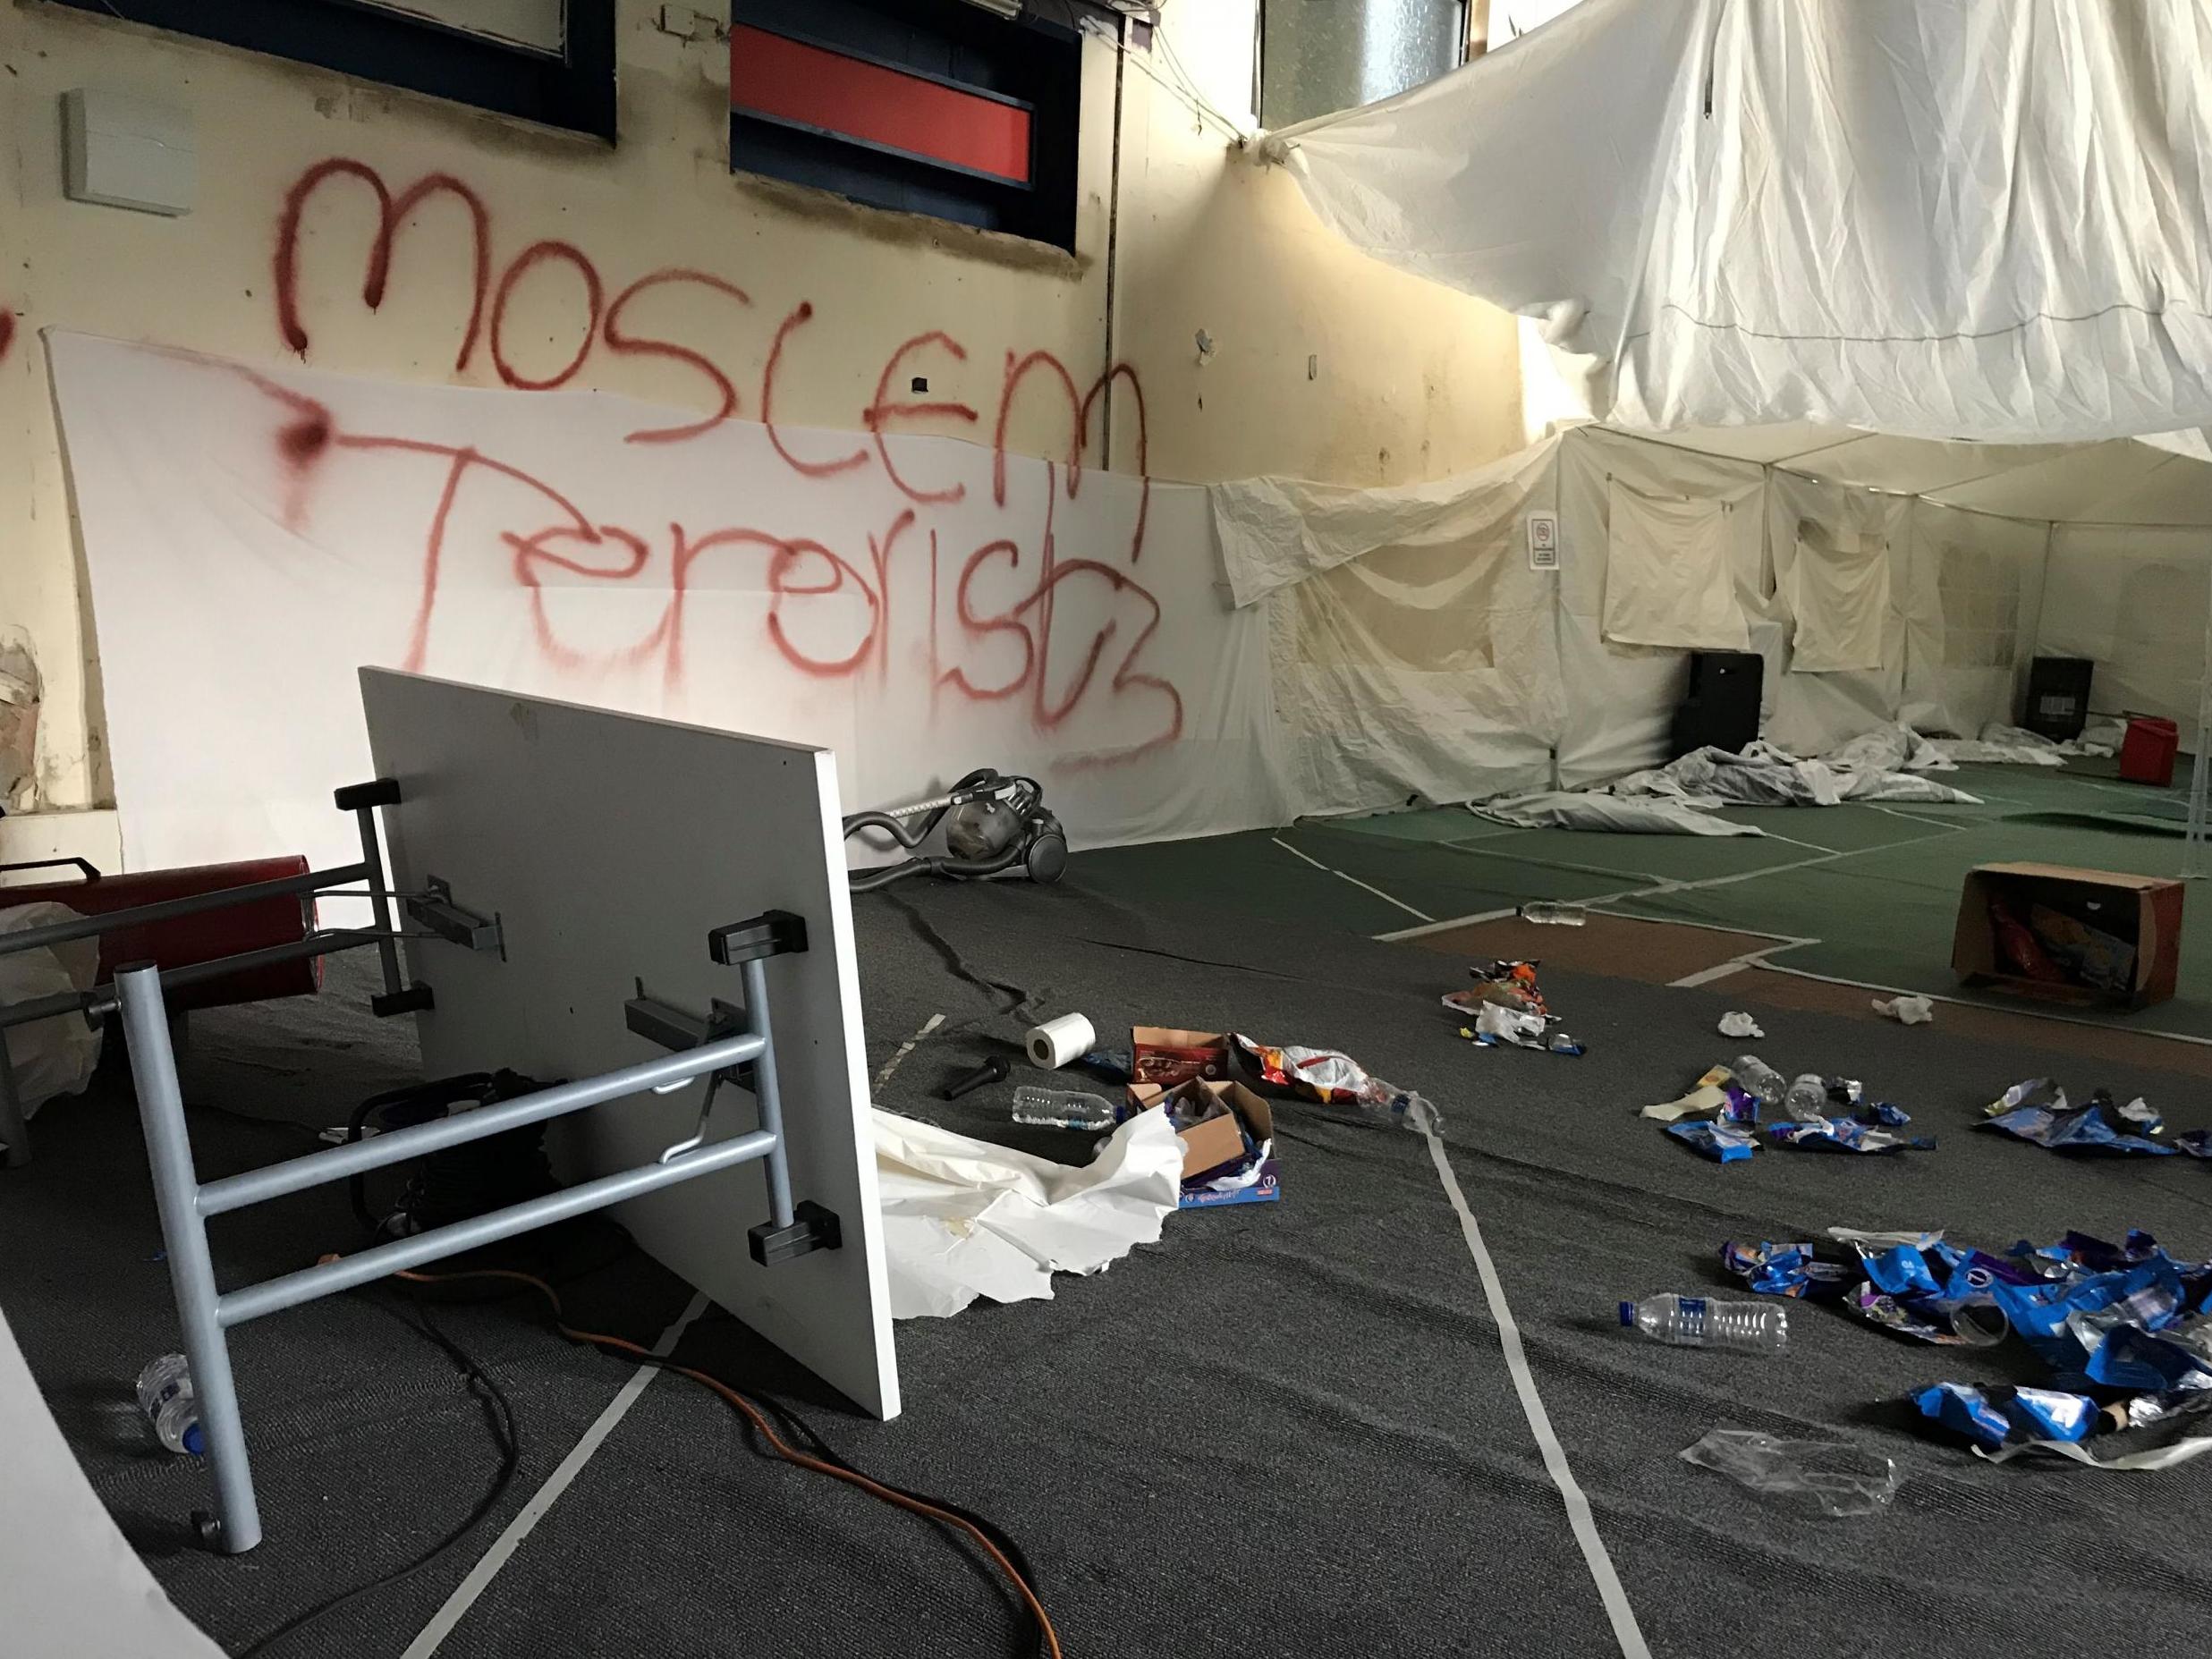 During the first attack on the Bahr Academy in January, vandals daubed racist graffiti on the prayer room walls